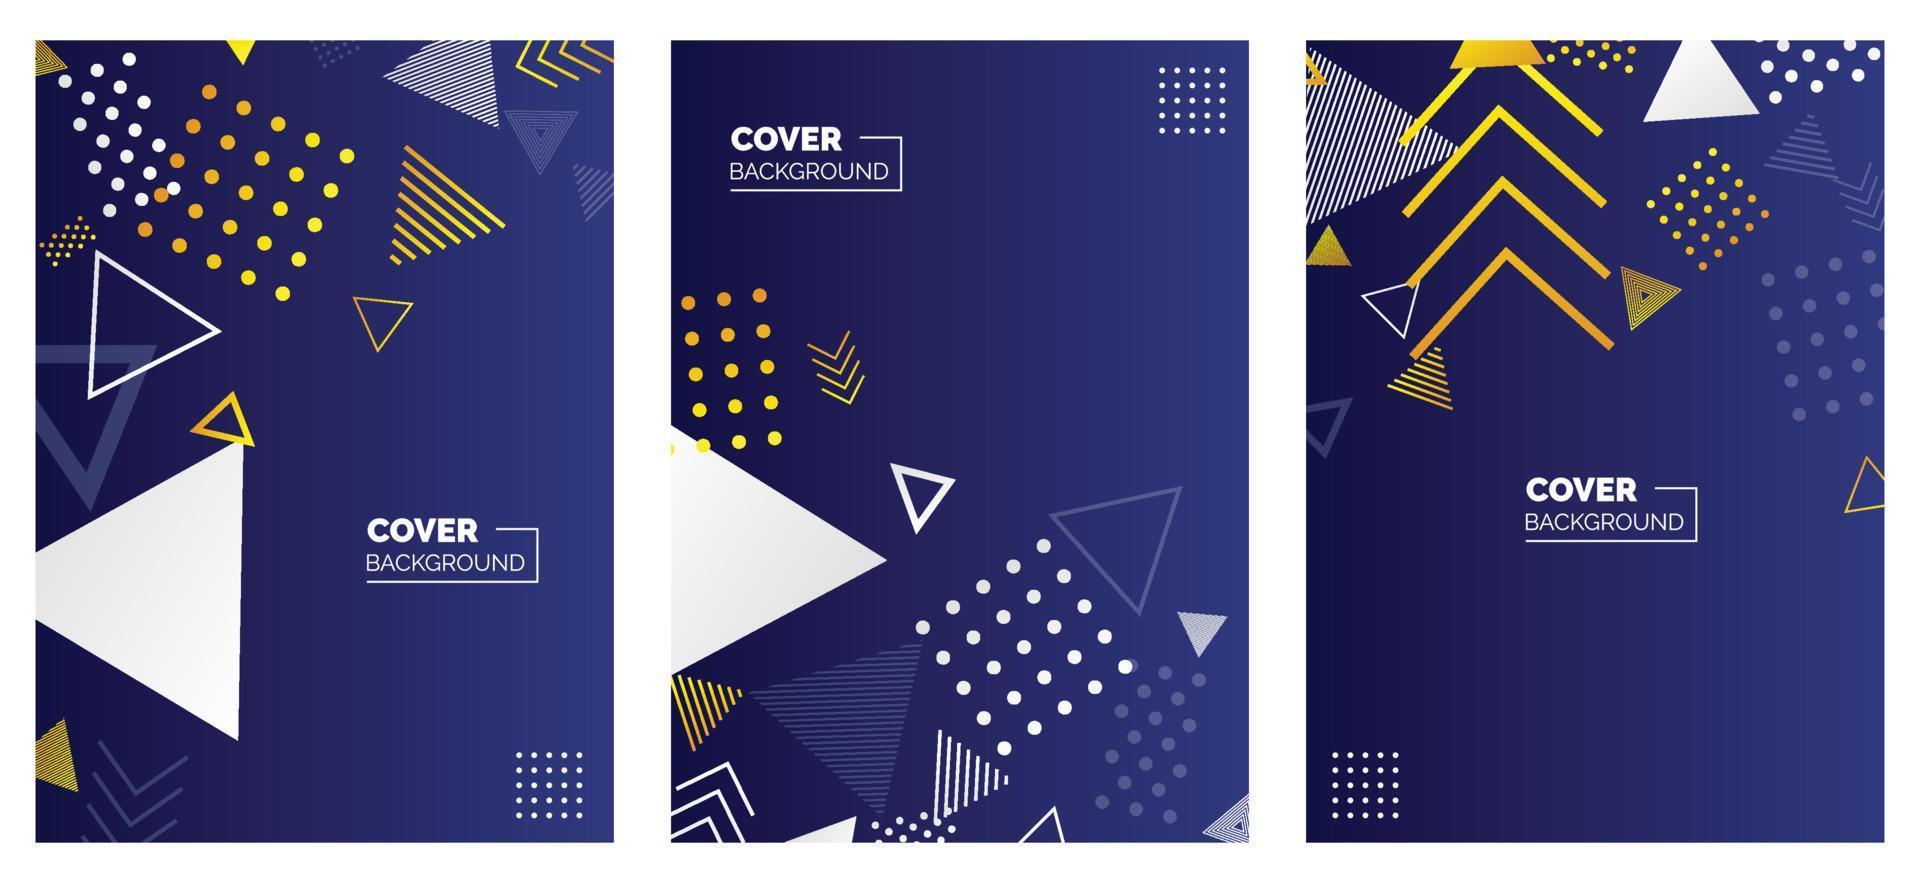 Placard templates set with abstract shapes. 80s memphis geometric style flat and line design elements. Retro art for a4 covers. banners. flyers and posters. Eps10 vector illustrations